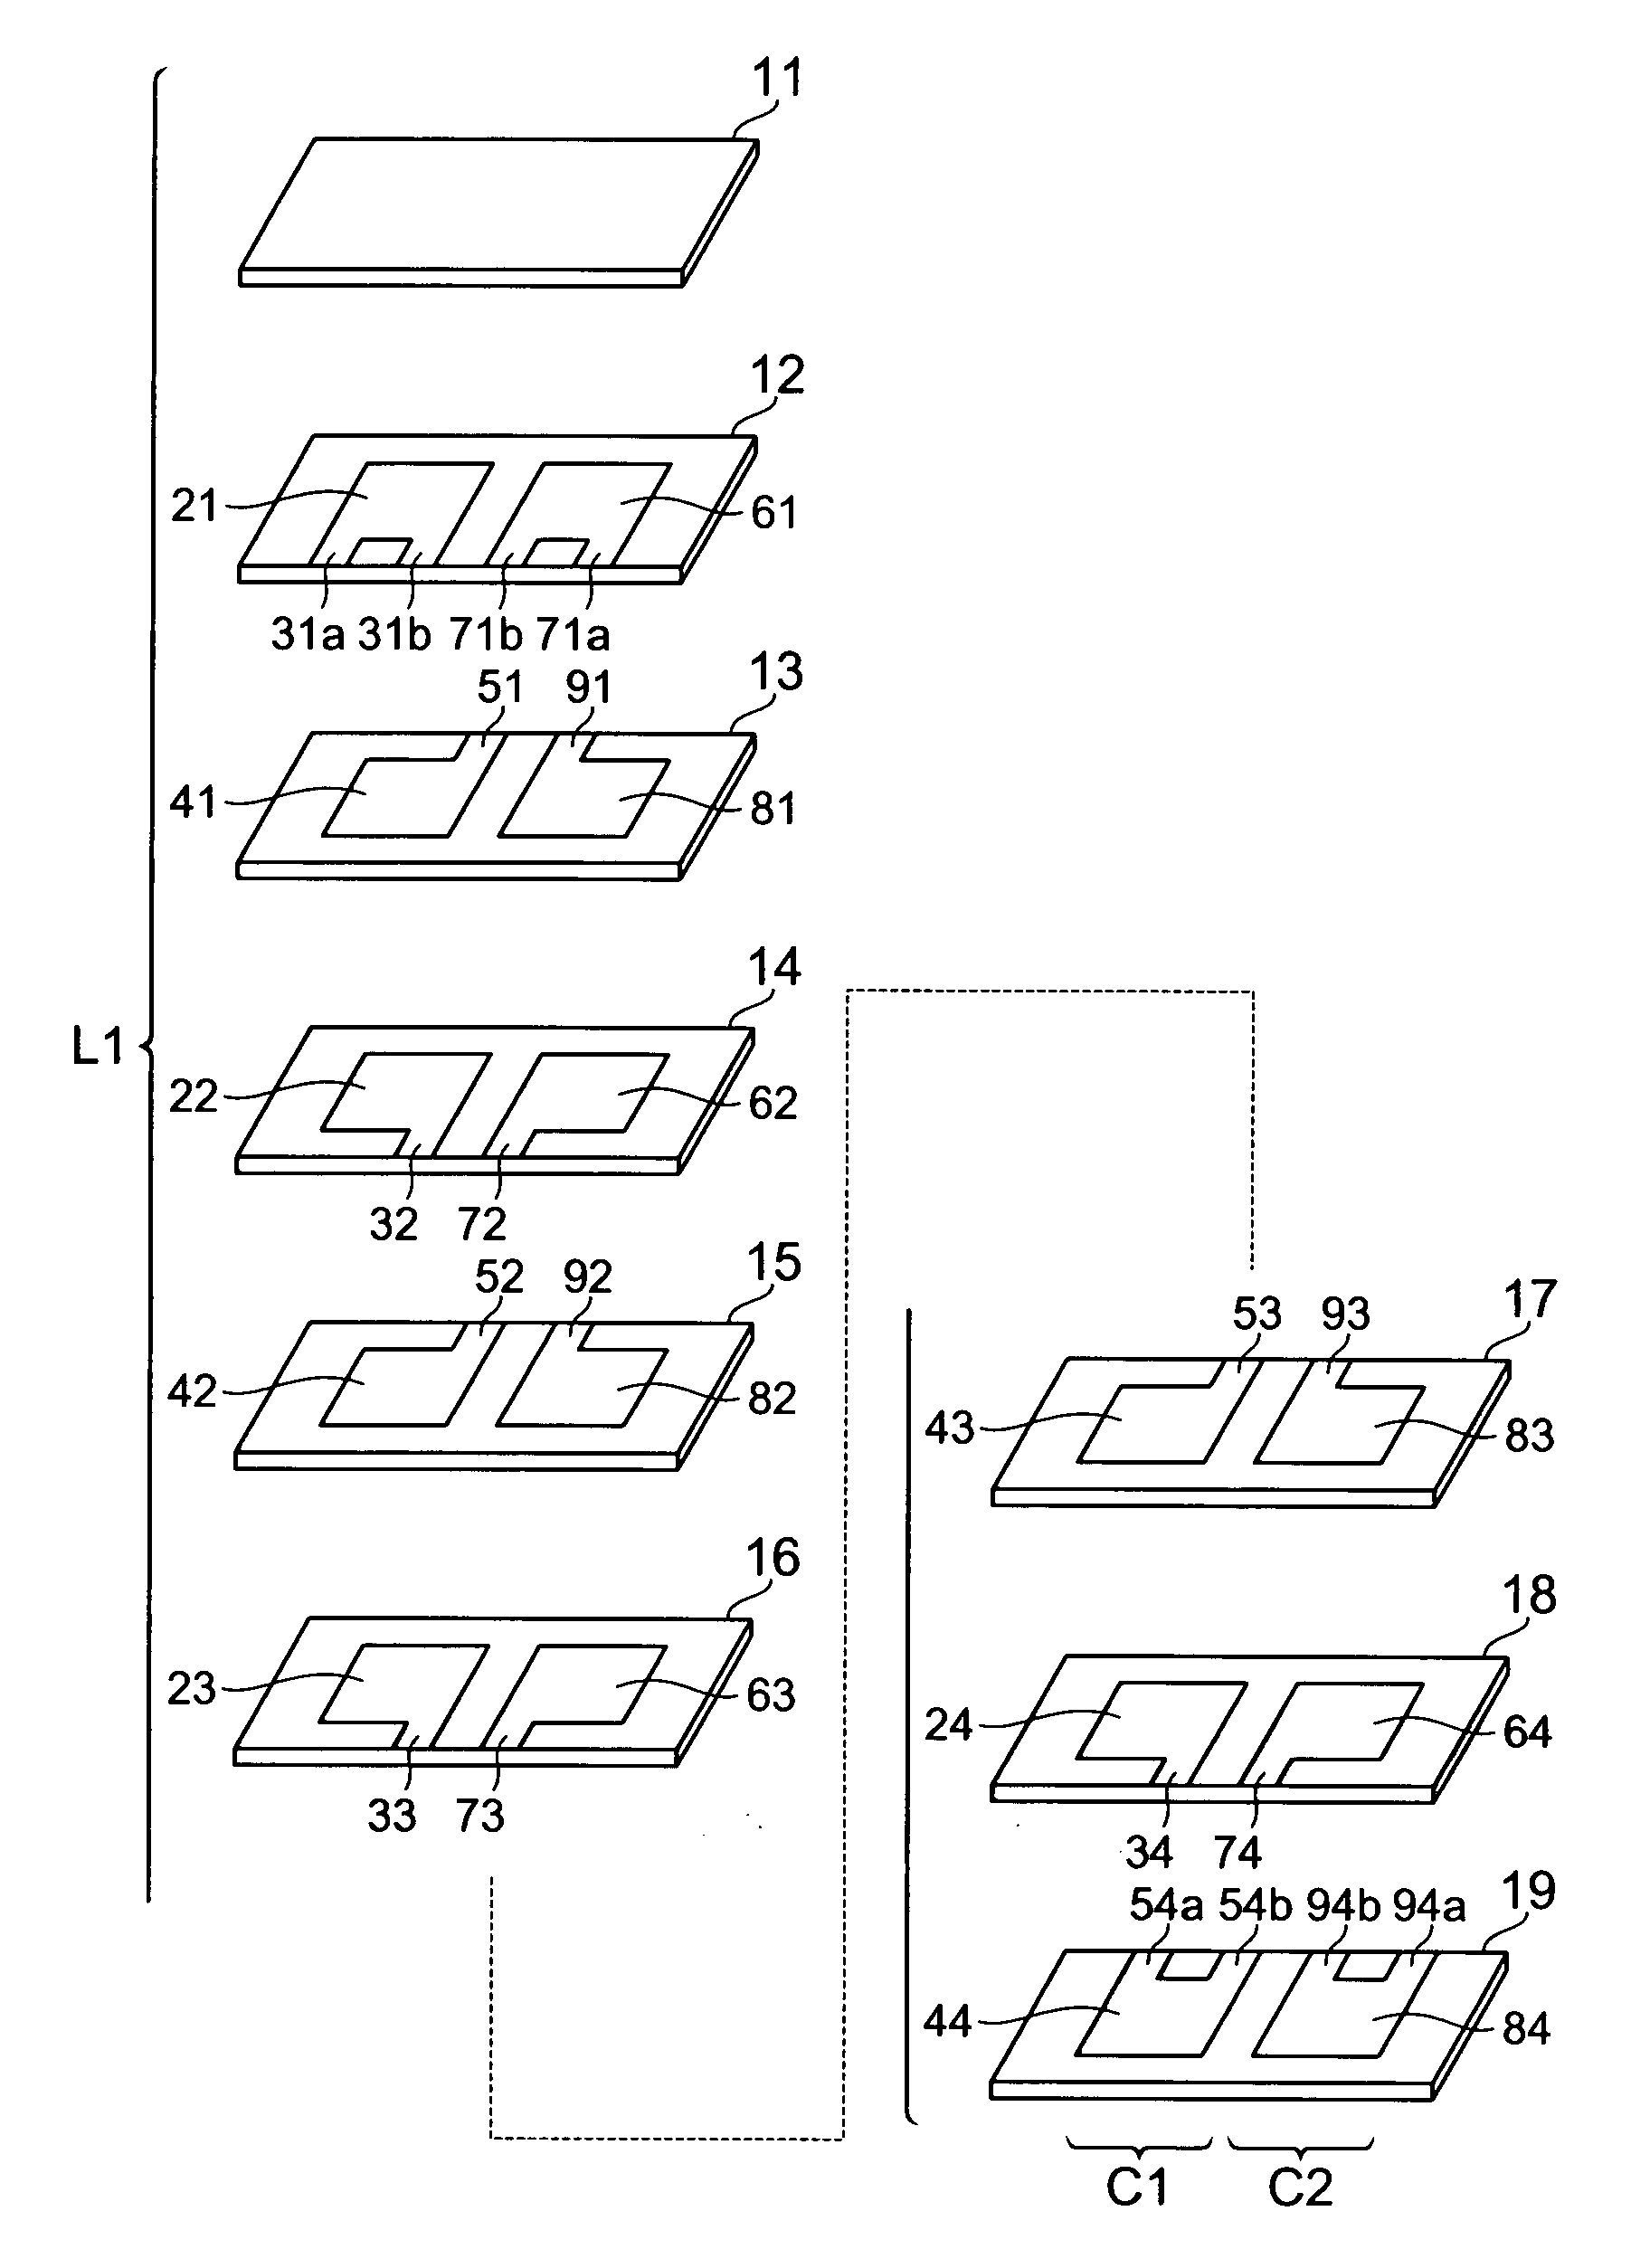 Multilayer capacitor array